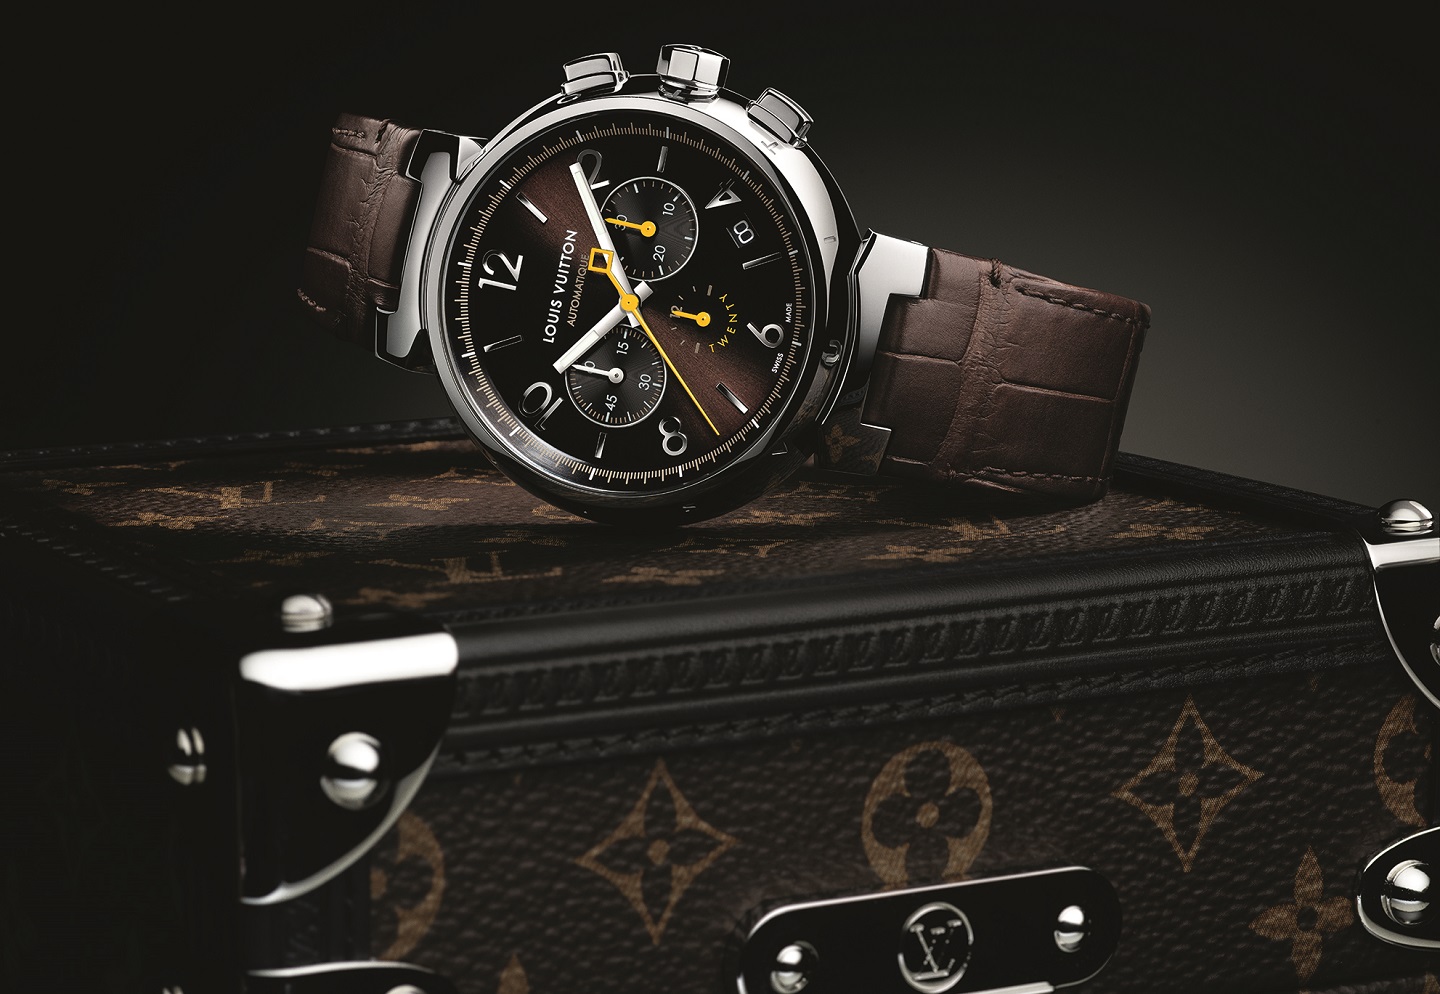 Louis Vuitton Uses Advanced Materials And Watchmaking Skills In